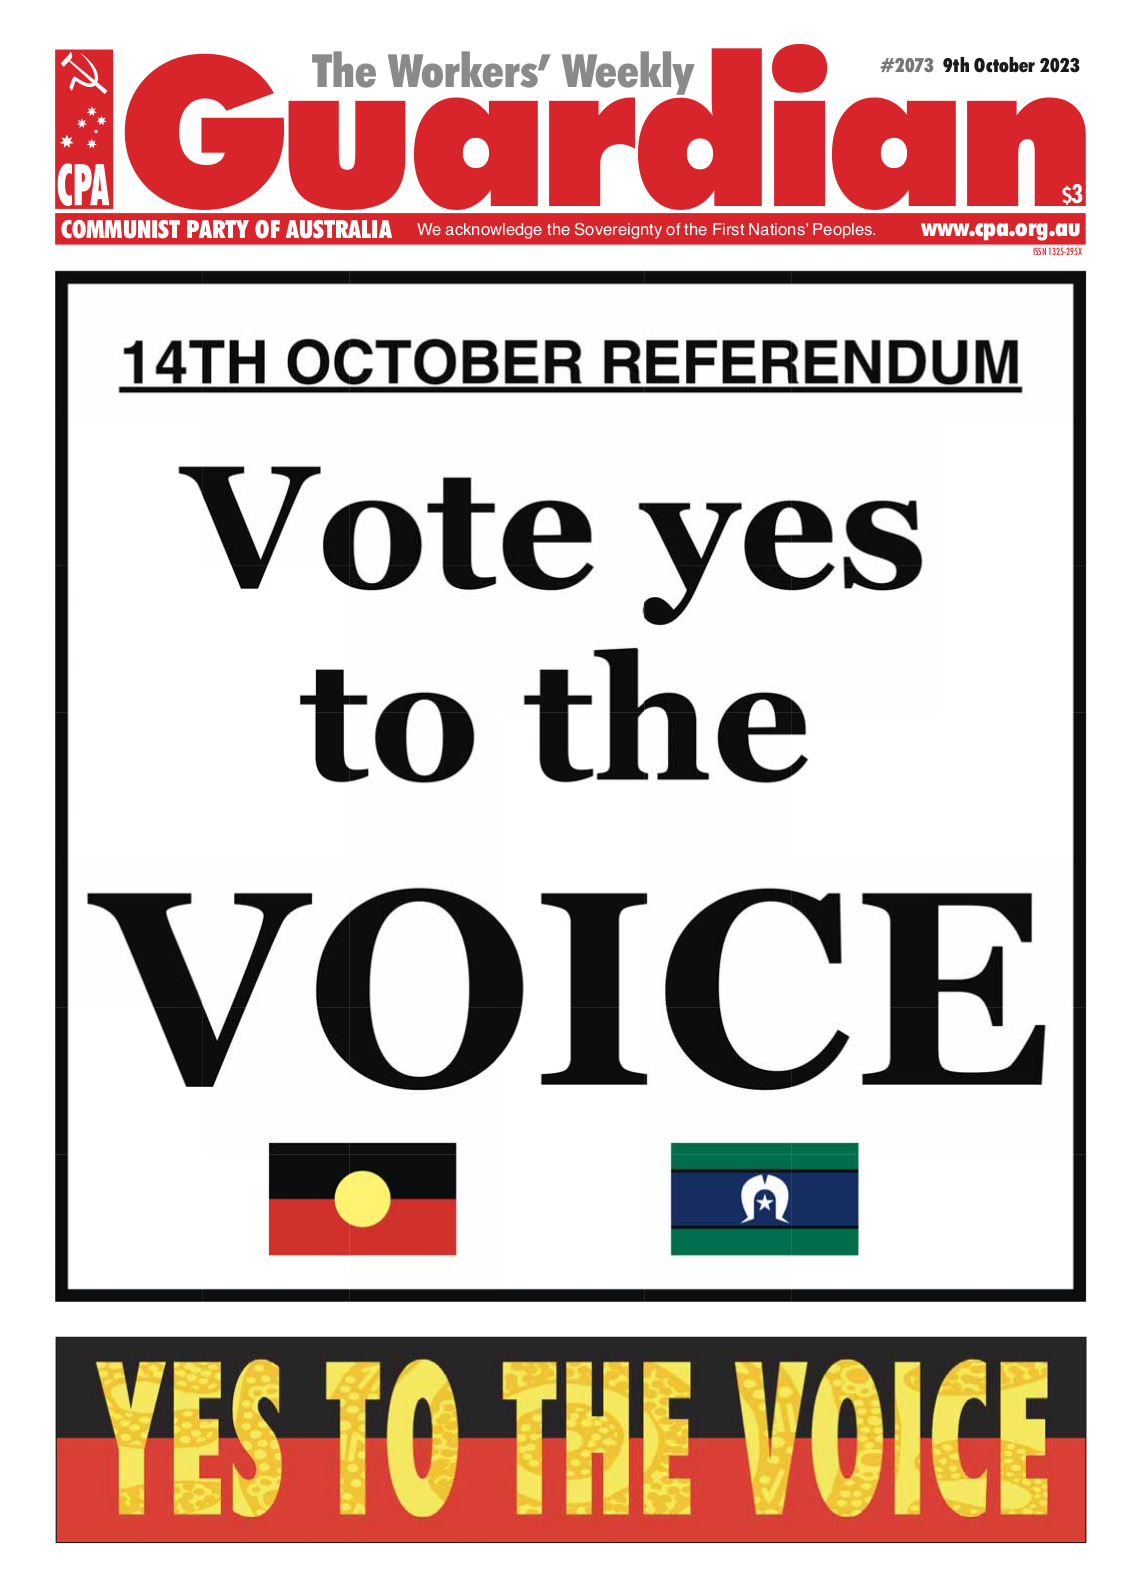 CP-Australia: Vote YES to the voice!